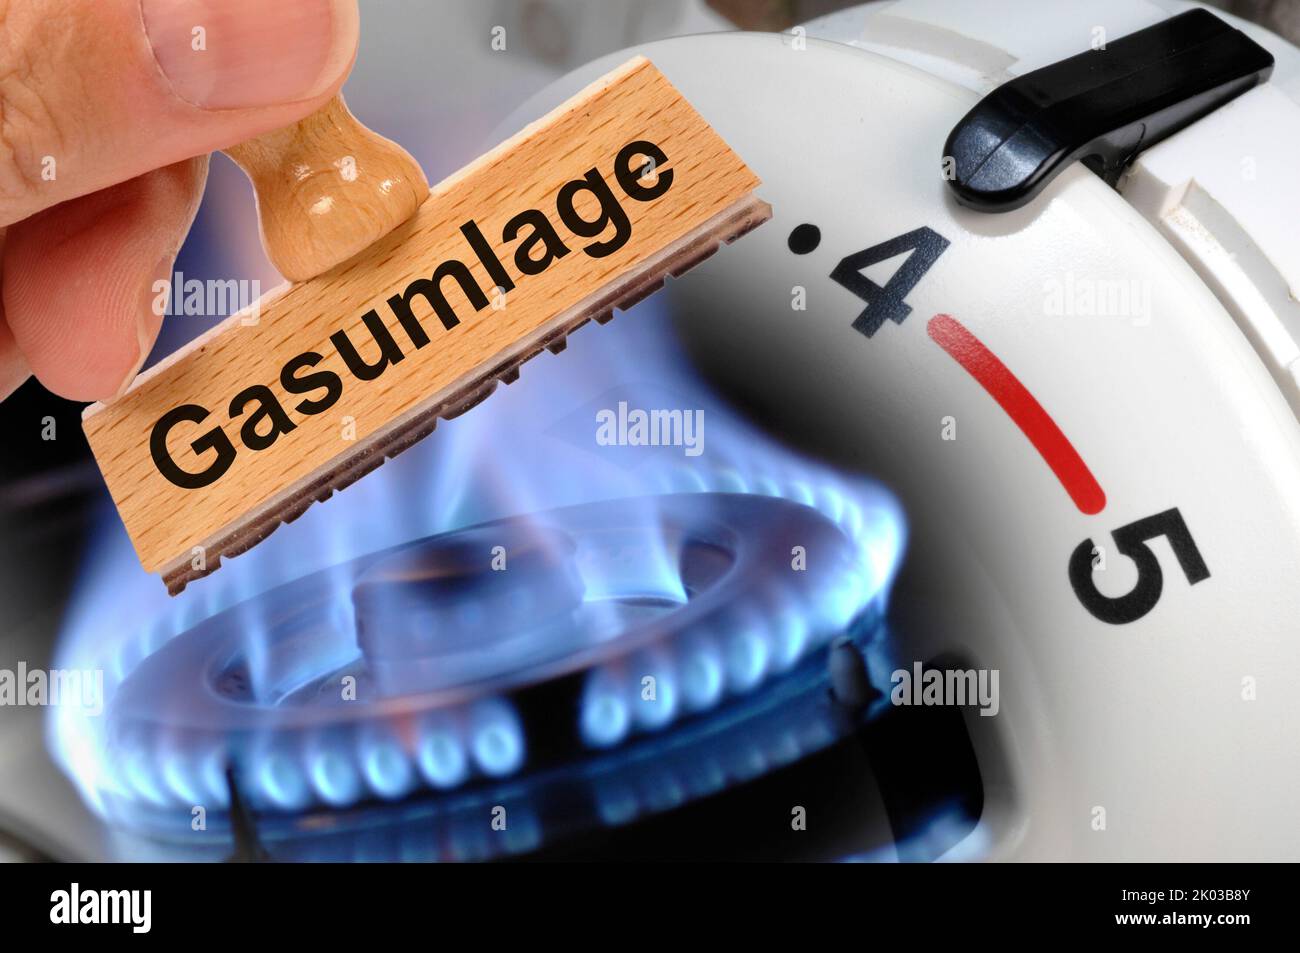 Gas flame, gas apportionment is printed on a wooden stamp Stock Photo